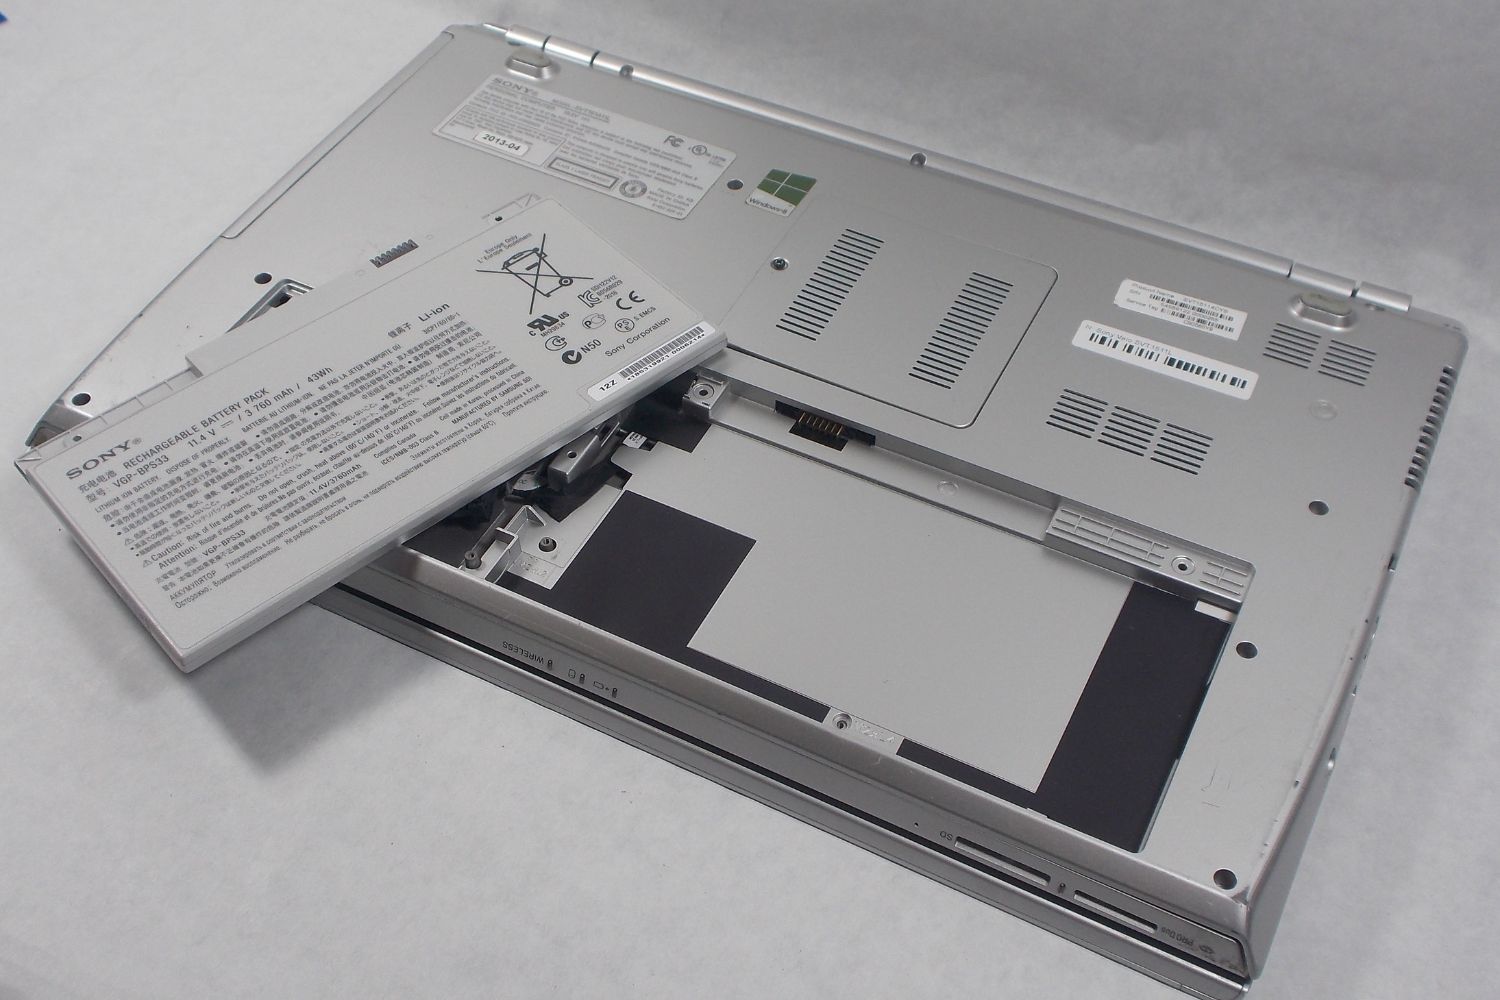 How To Remove Battery From Sony VAIO Ultrabook